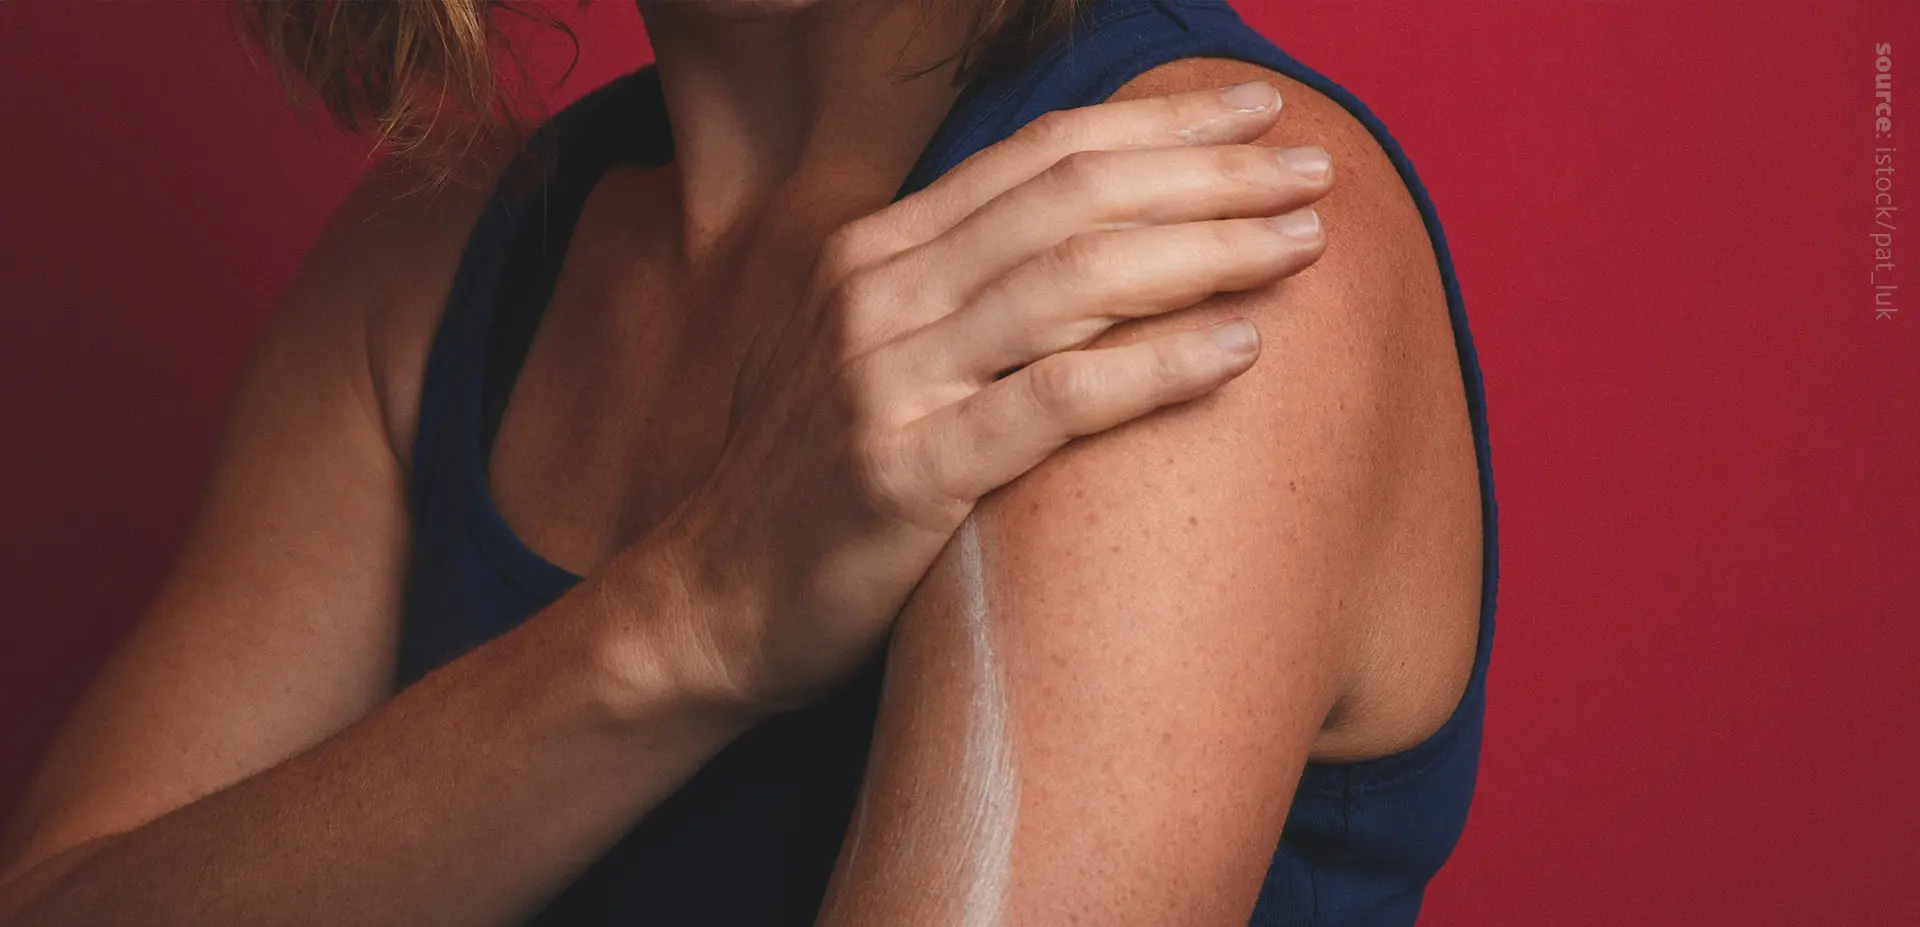 A photo of a person applying a cream on their shoulder.